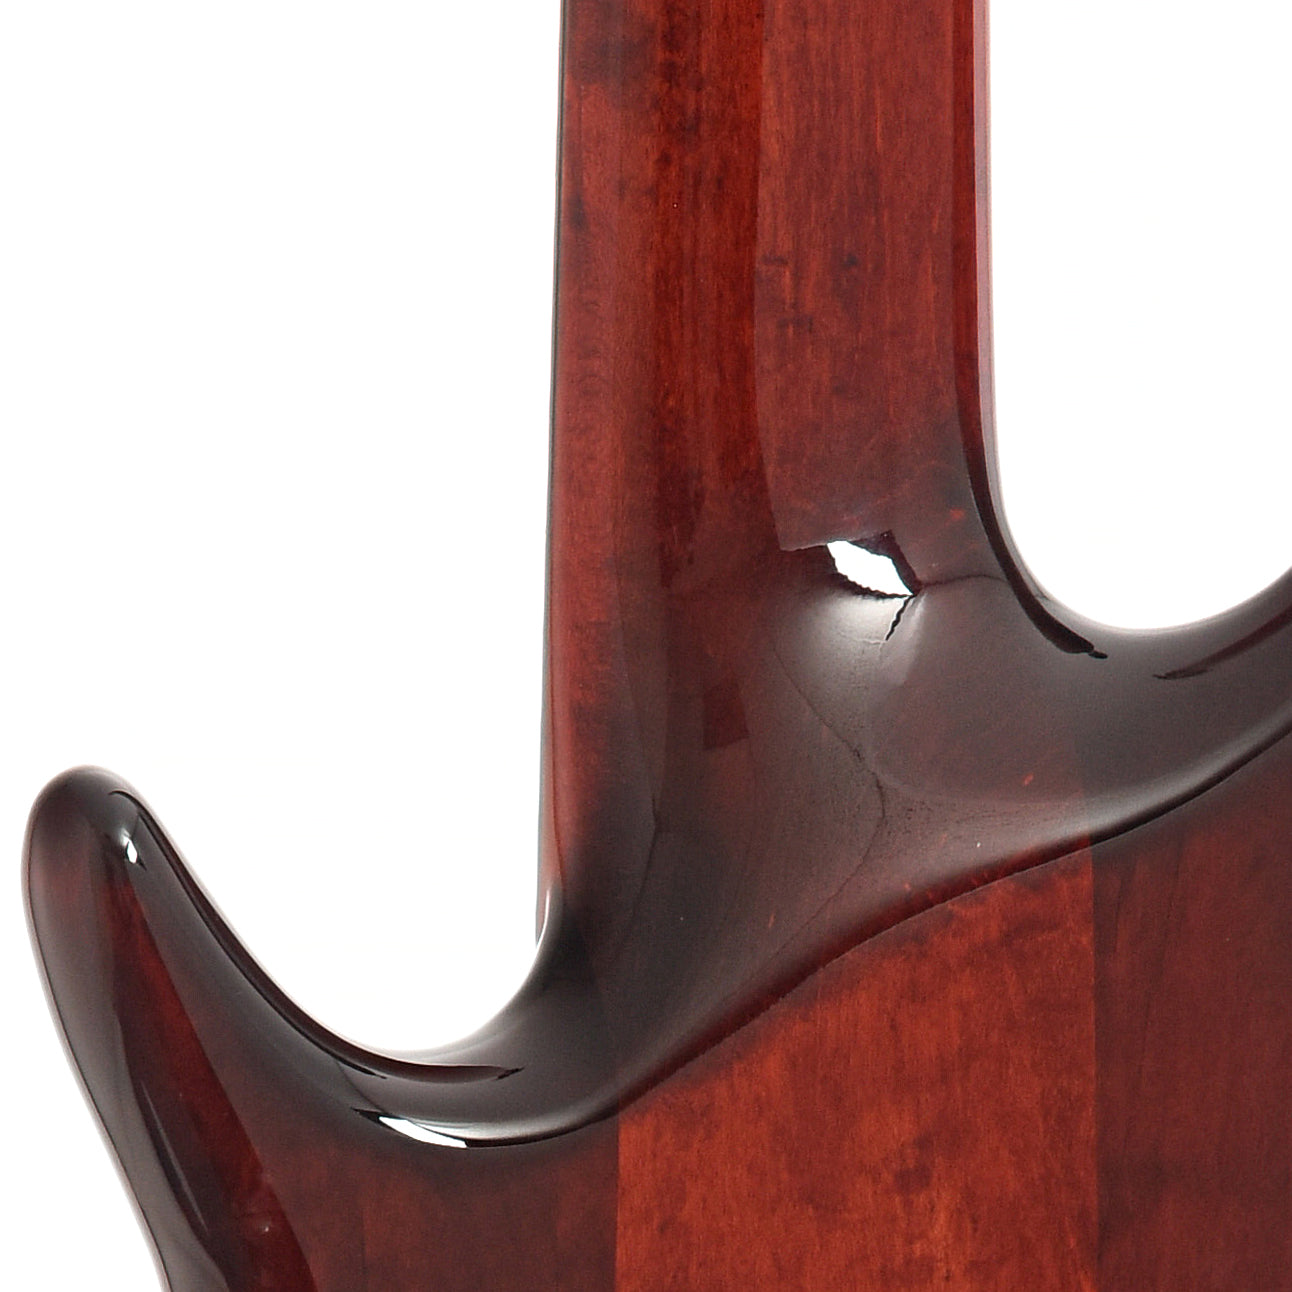 Neck joint of Carvin LB76